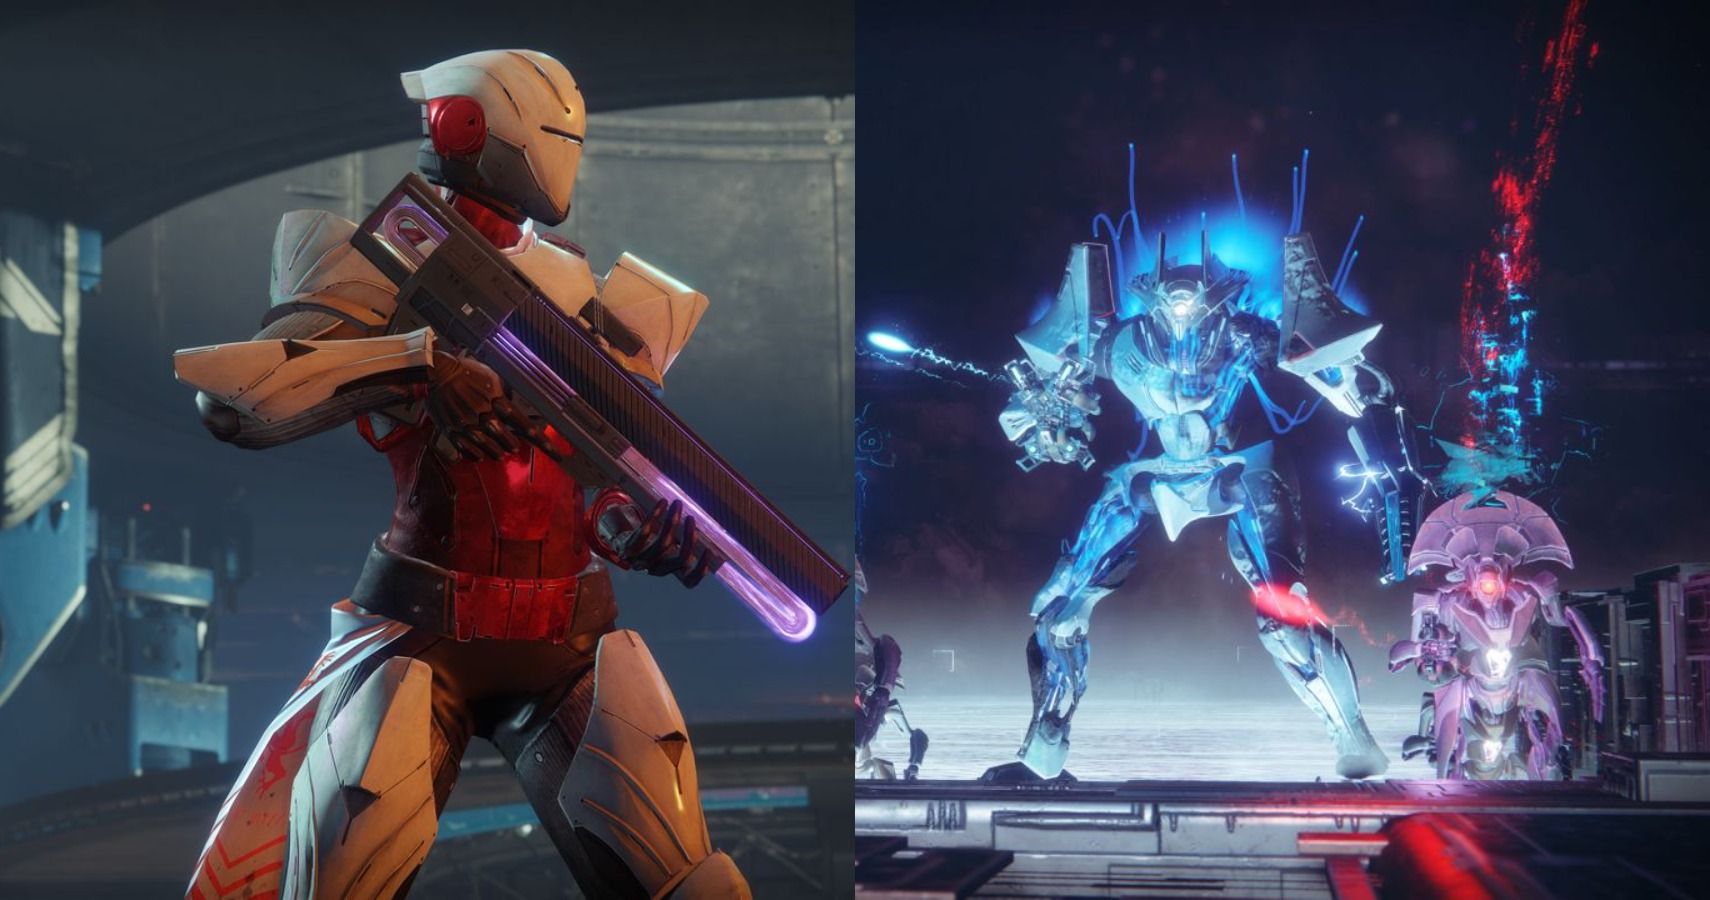 Destiny 2 Guardian Holding Graviton Lance And Inverted Spire Enemies